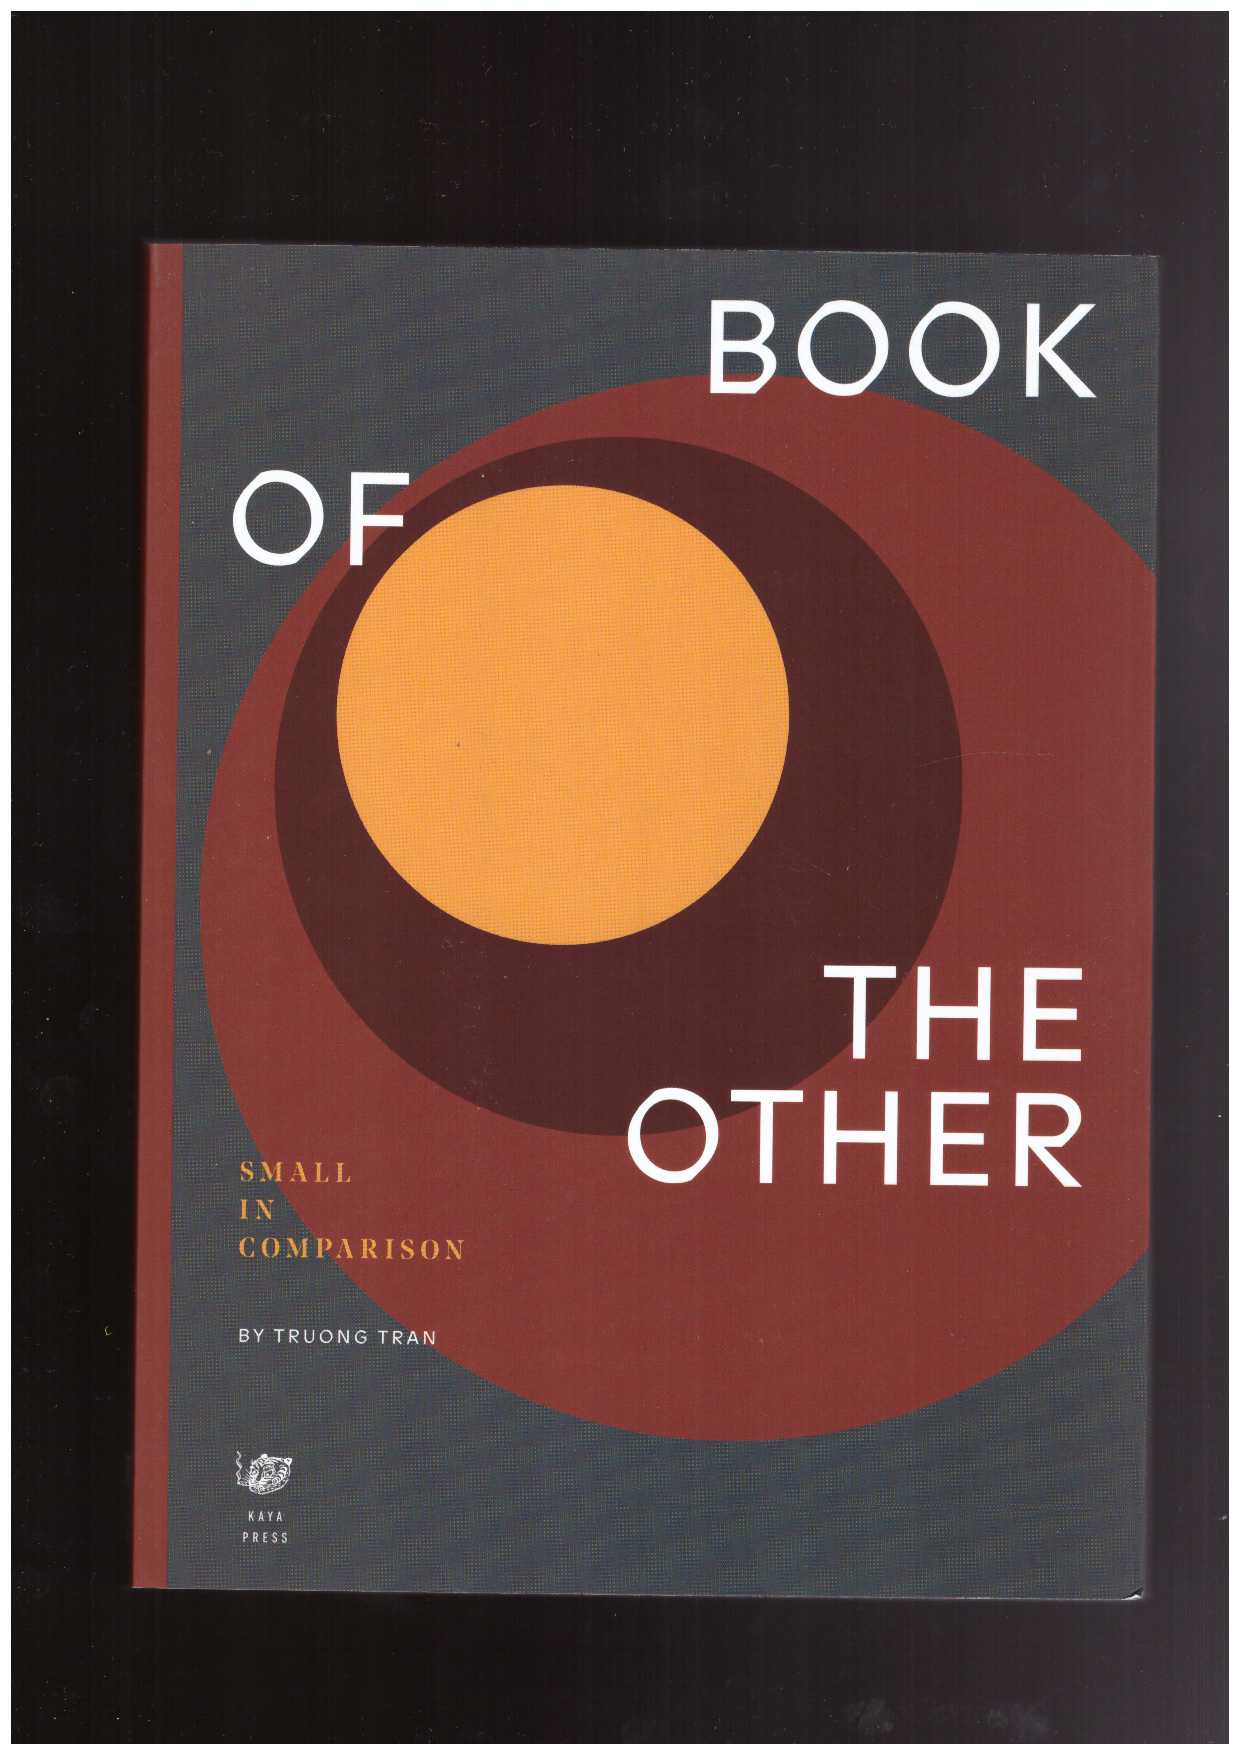 TRAN, Truong - Book of the Other. Small in comparison